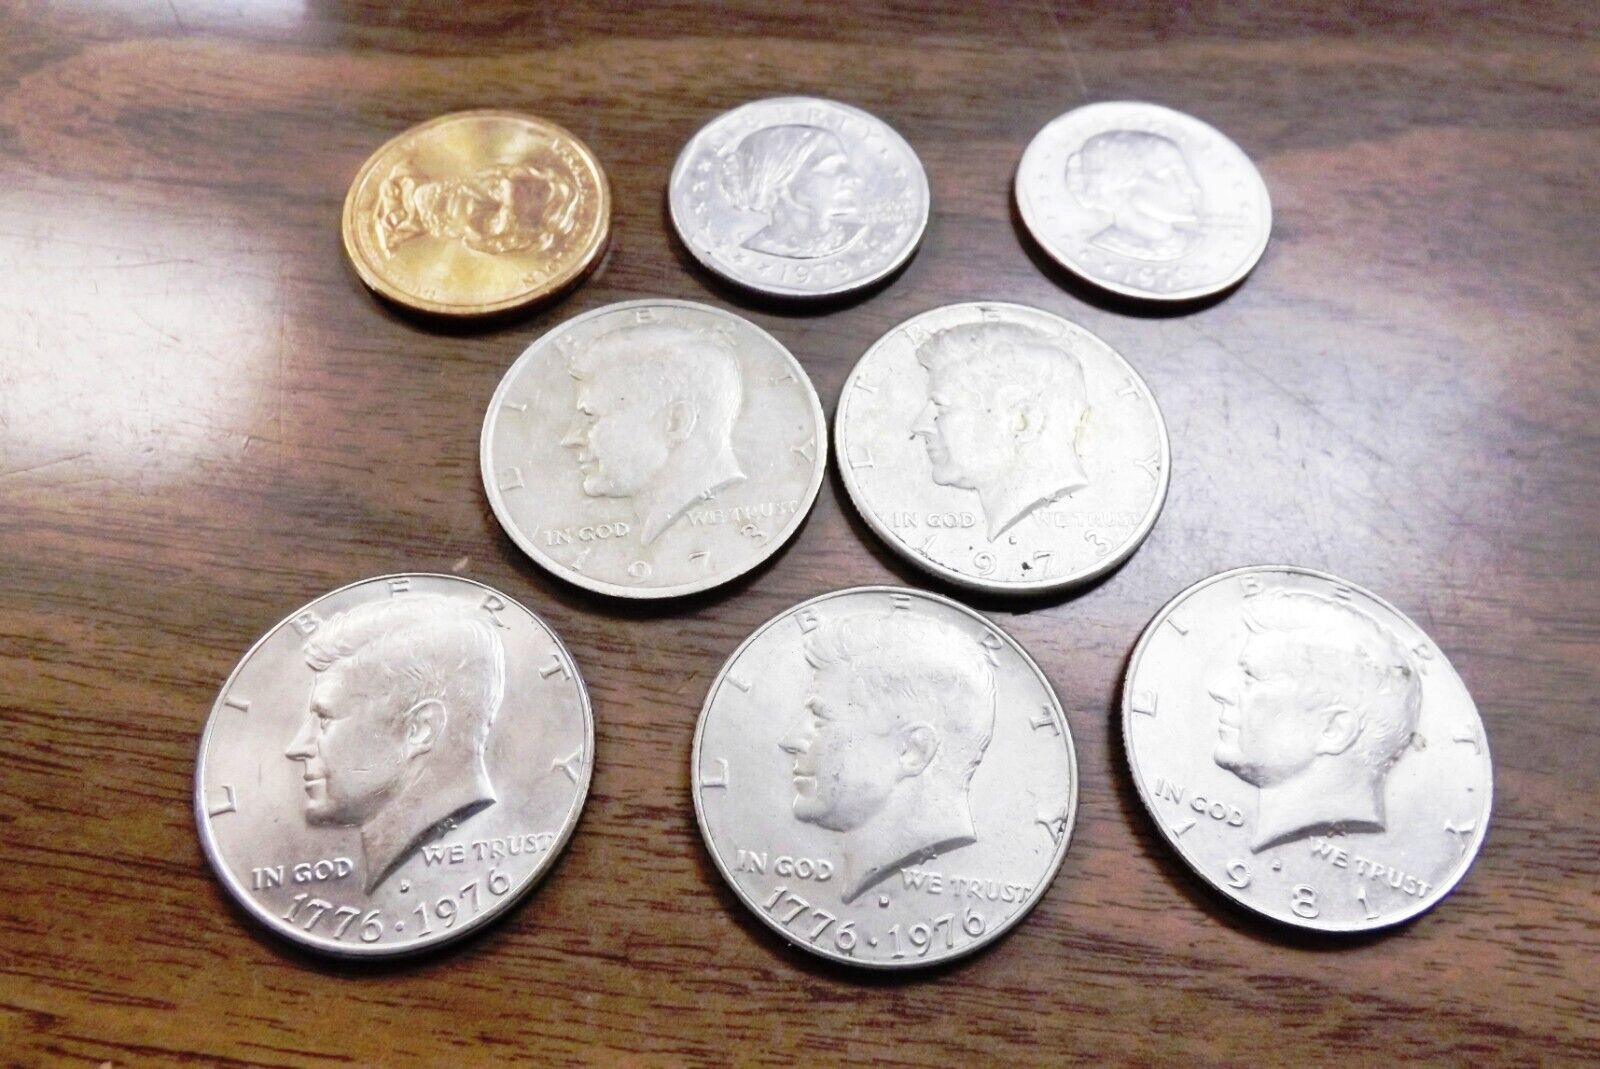 US Clad Collection 2 Anthony 1979-D, Lincoln $1 2010, 2 ’73 JFK, 2 ’76 JFK 1 ‘81